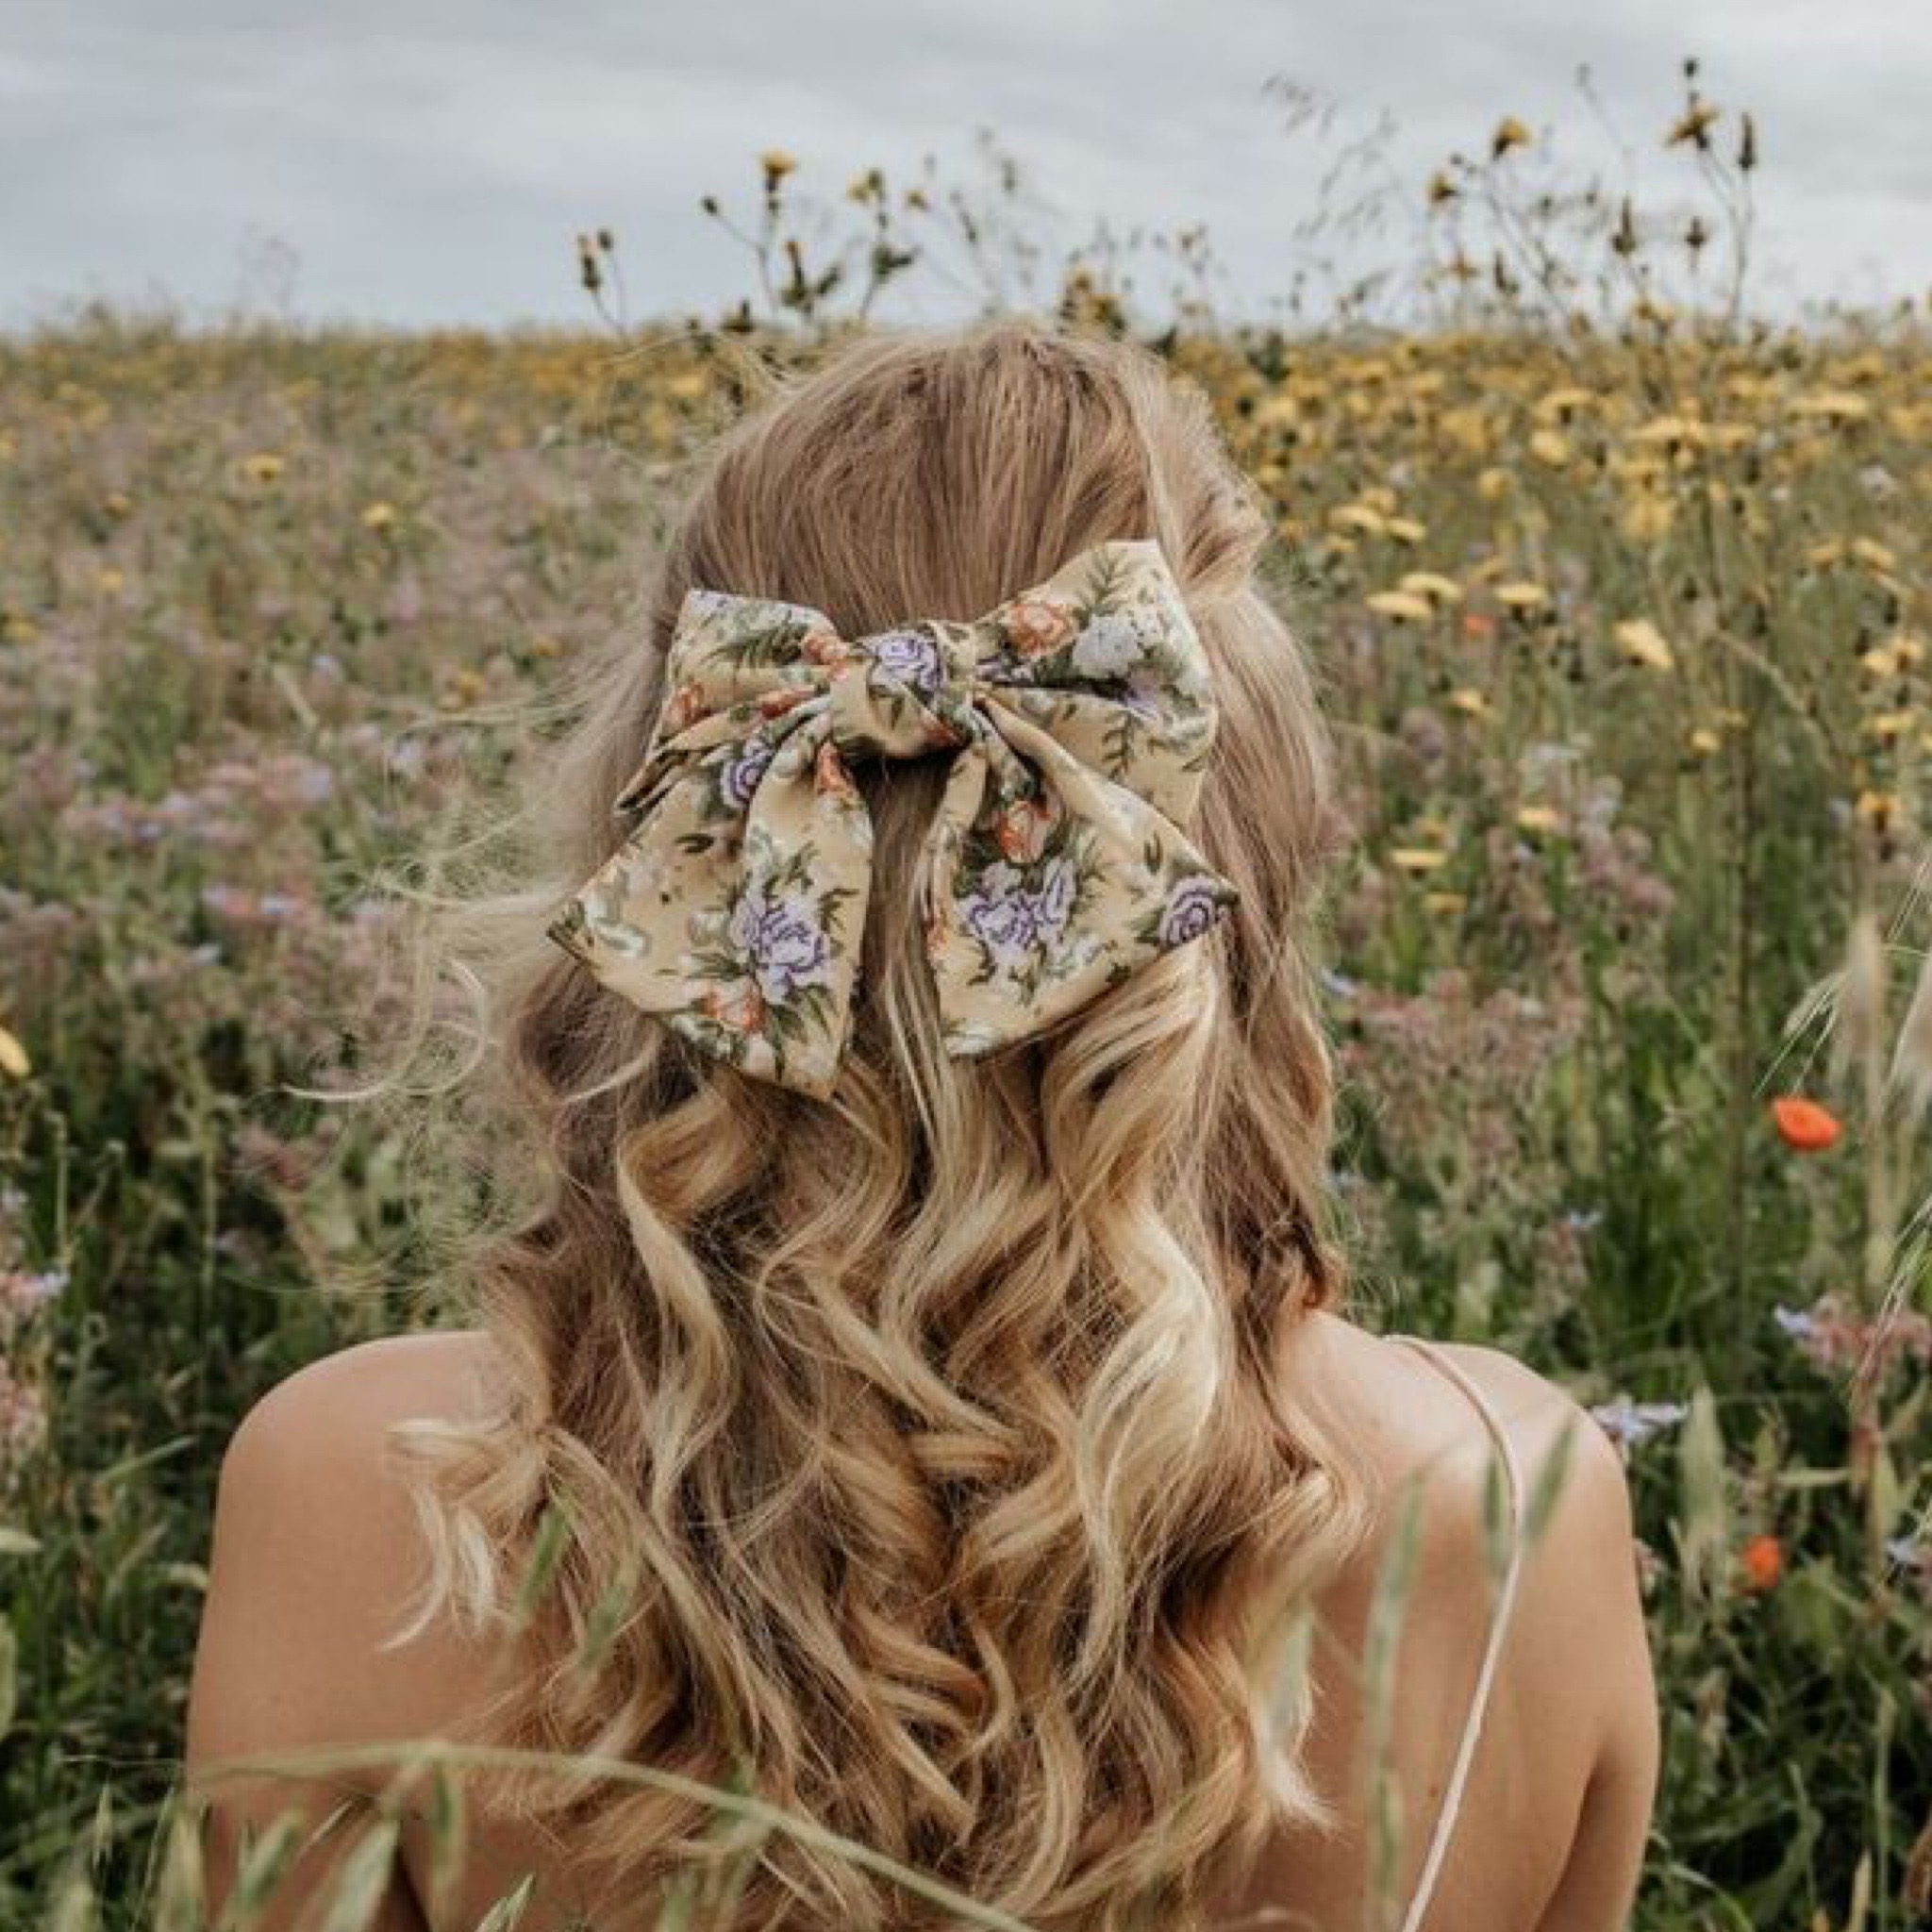 women's hair accessories Archives - Wisteria London